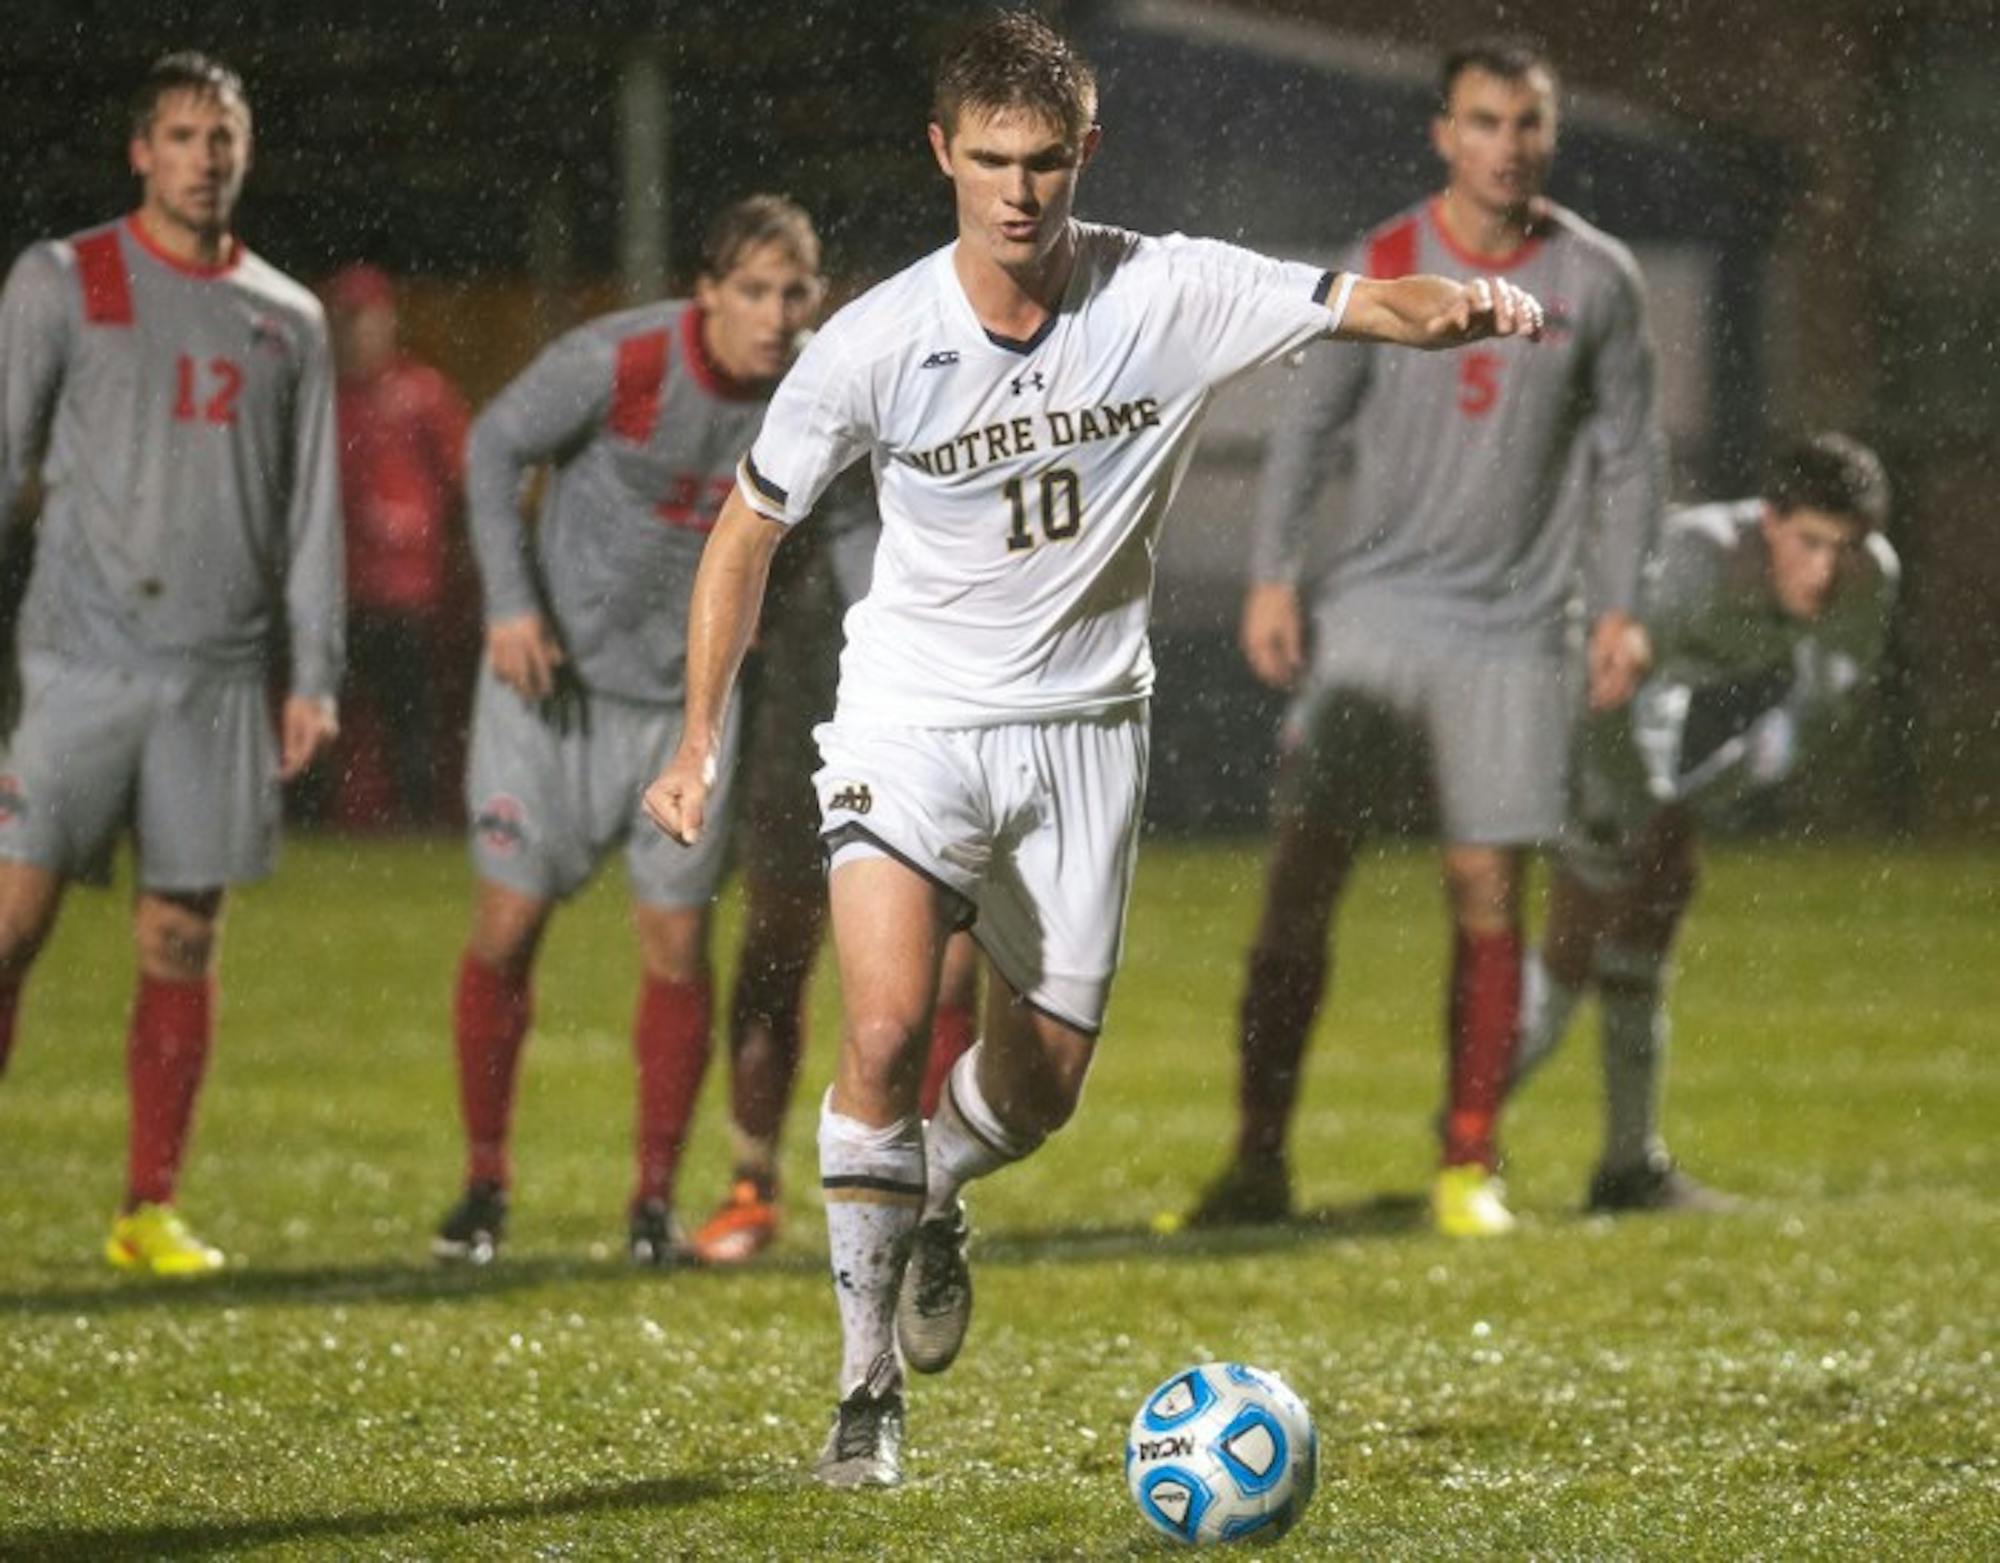 Irish sophomore defender Brandon Aubrey lines up a penalty kick during Notre Dame’s 2-1 win over Ohio State on Sunday night.